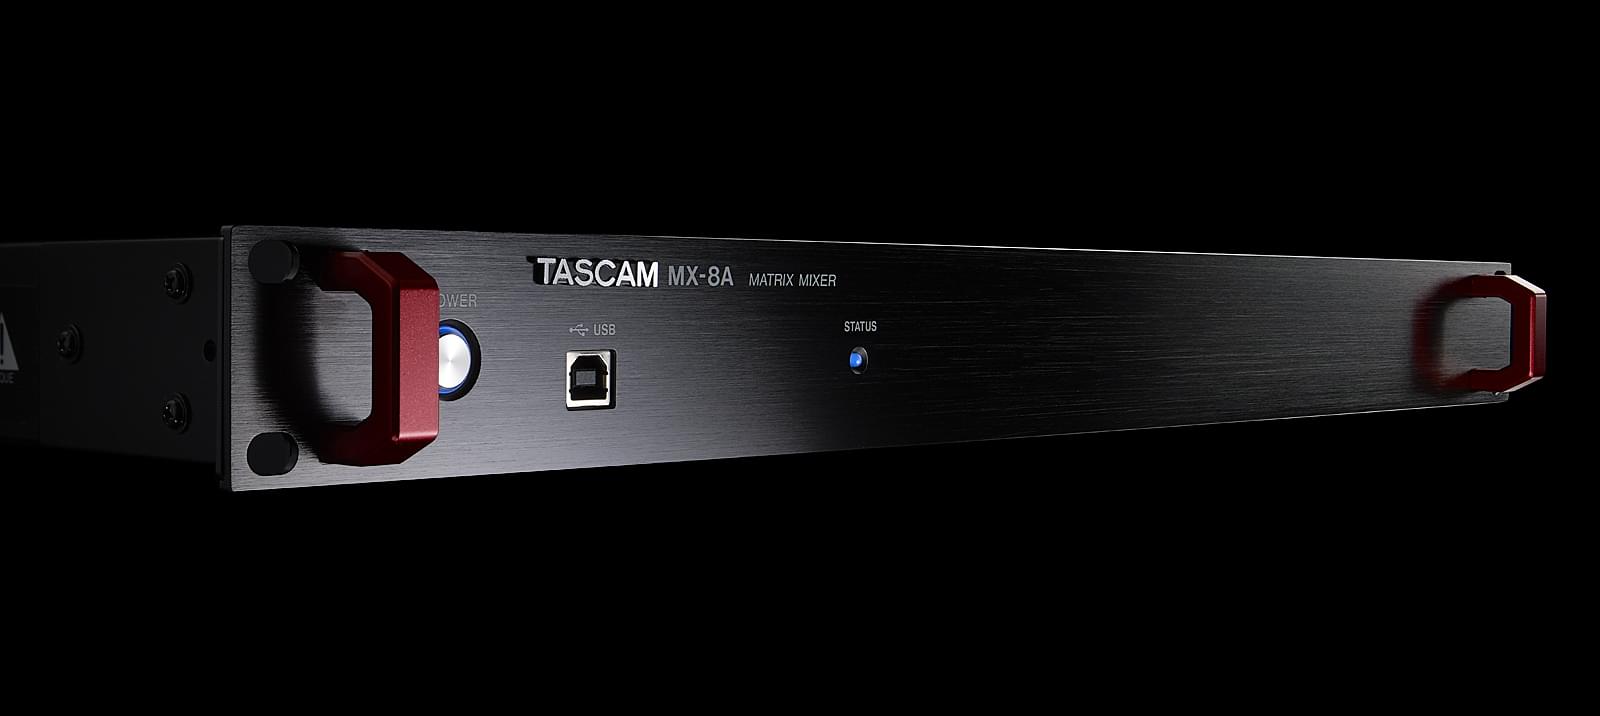 Left angle view | Tascam MX-8A